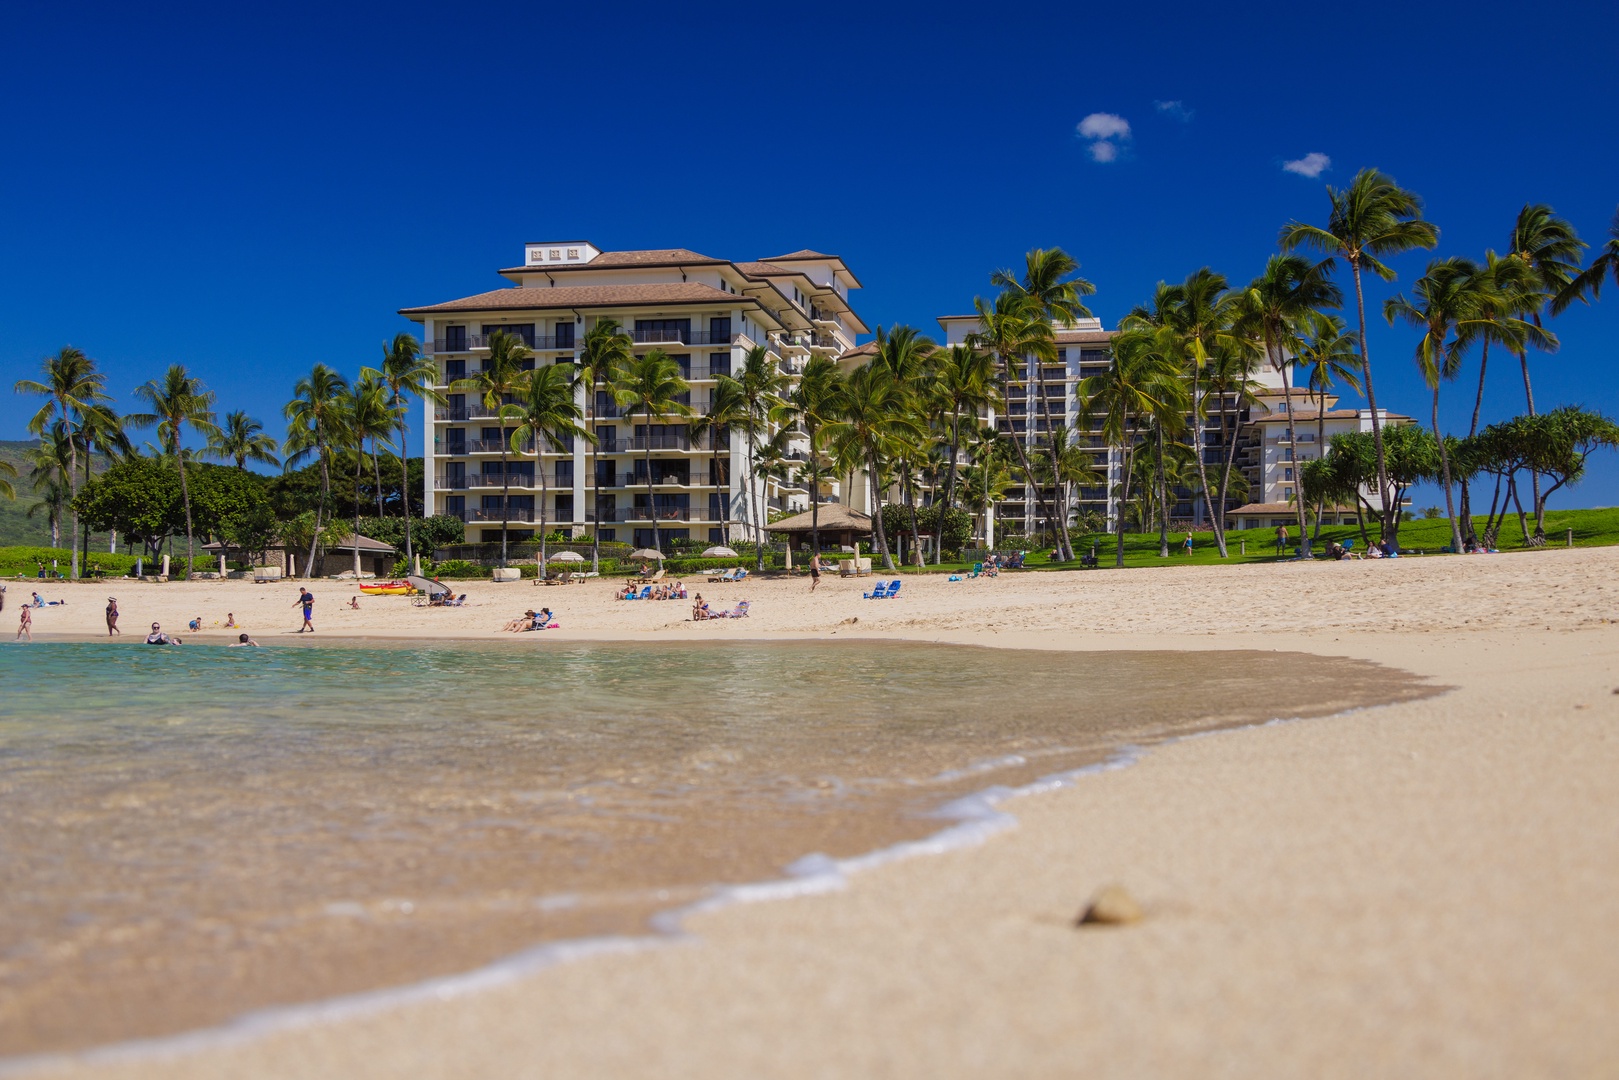 Kapolei Vacation Rentals, Ko Olina Kai 1035D - The private lagoon at Ko Olina is the perfect place for a relaxing afternoon in the sun.